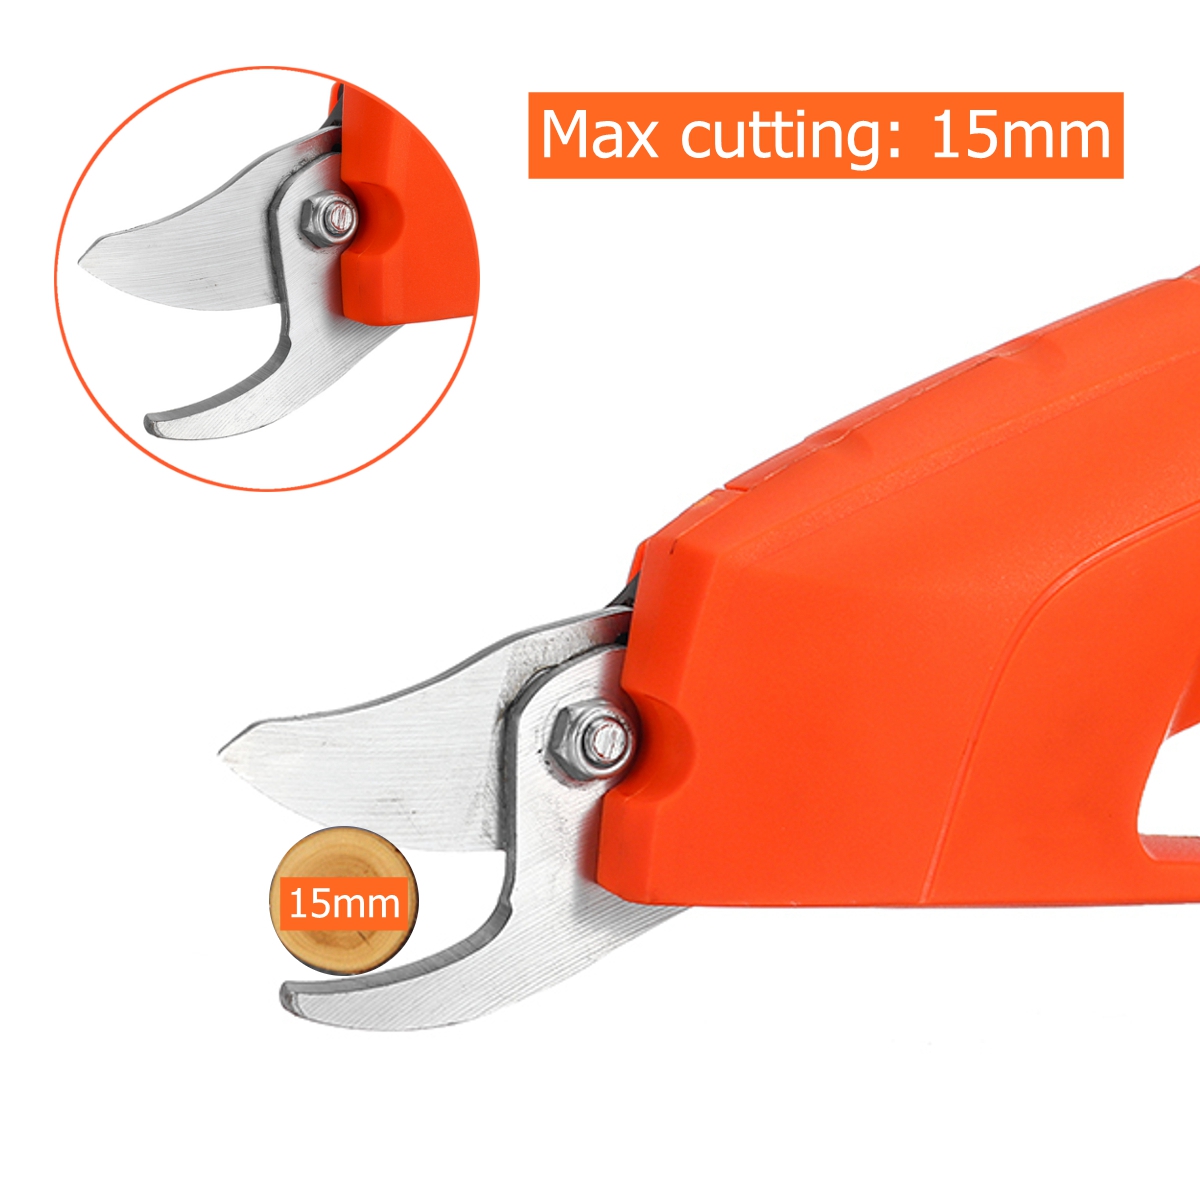 12V-Cordless-Rechargeable-Power-Pruner-Tree-Trimmers-Secateurs-Cutting-Scissors-Electric-Pruning-Bra-1559733-6